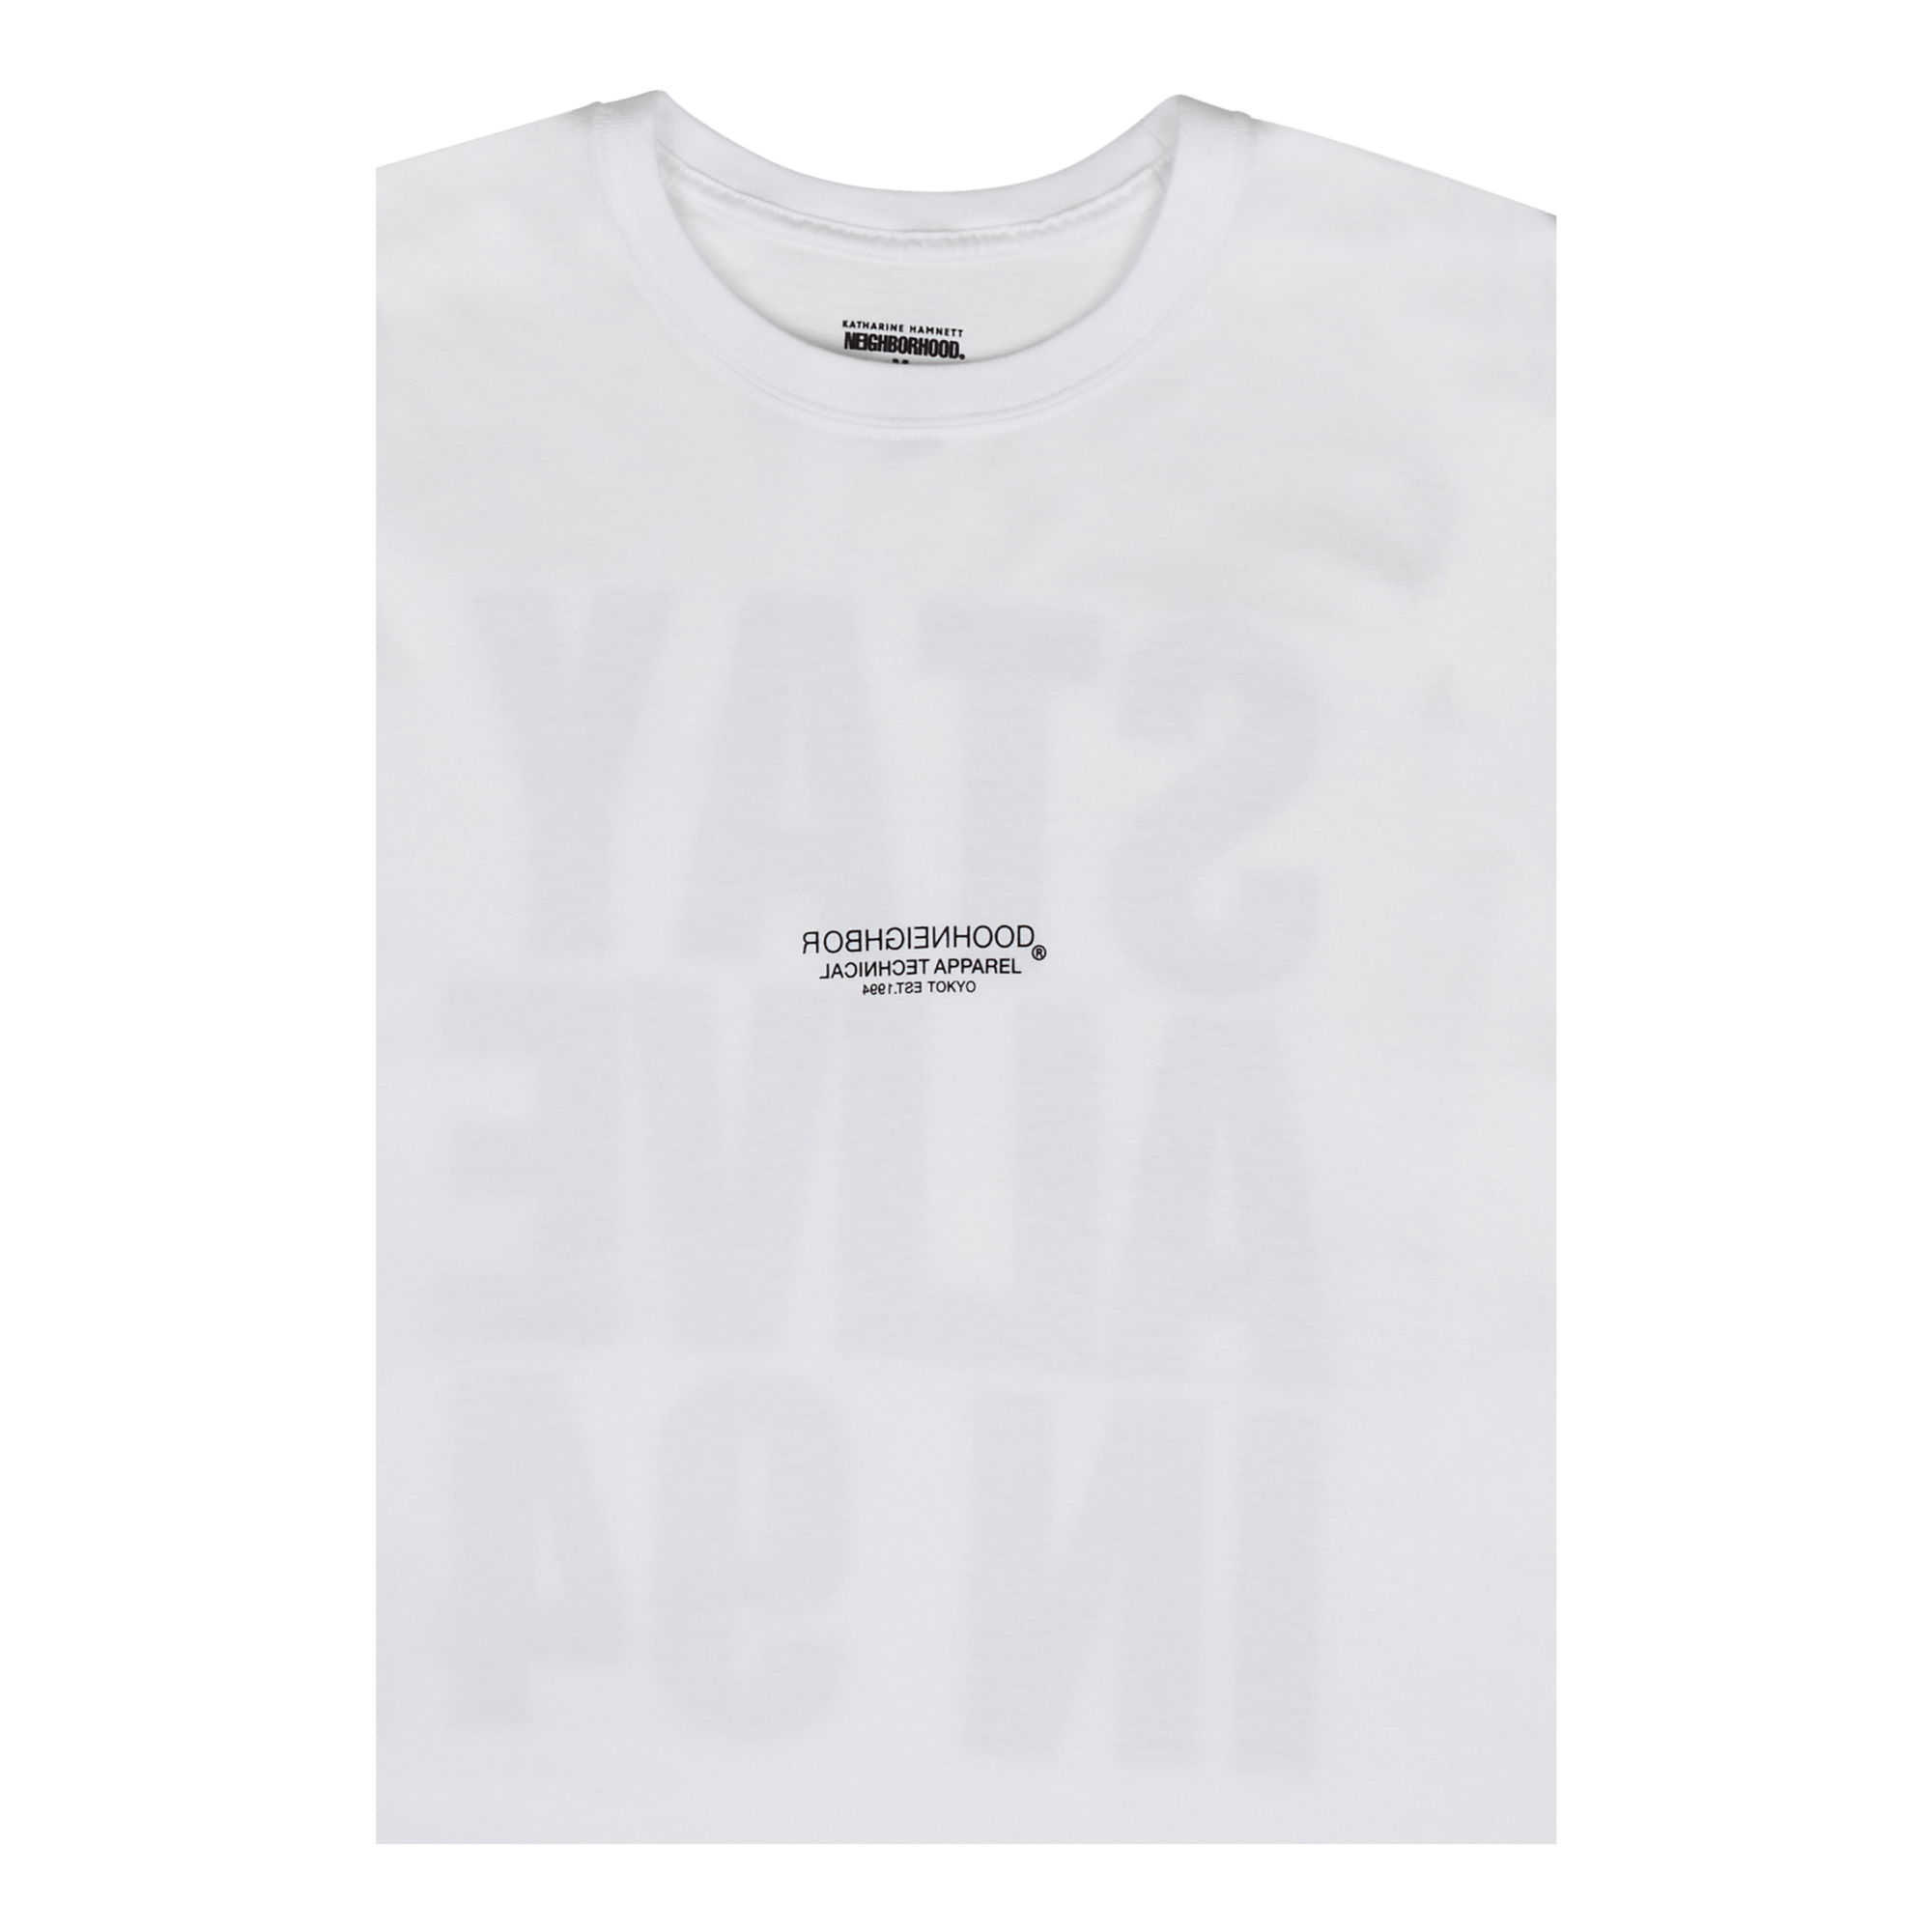 Kh . Tee-1 Ls . Co Wh